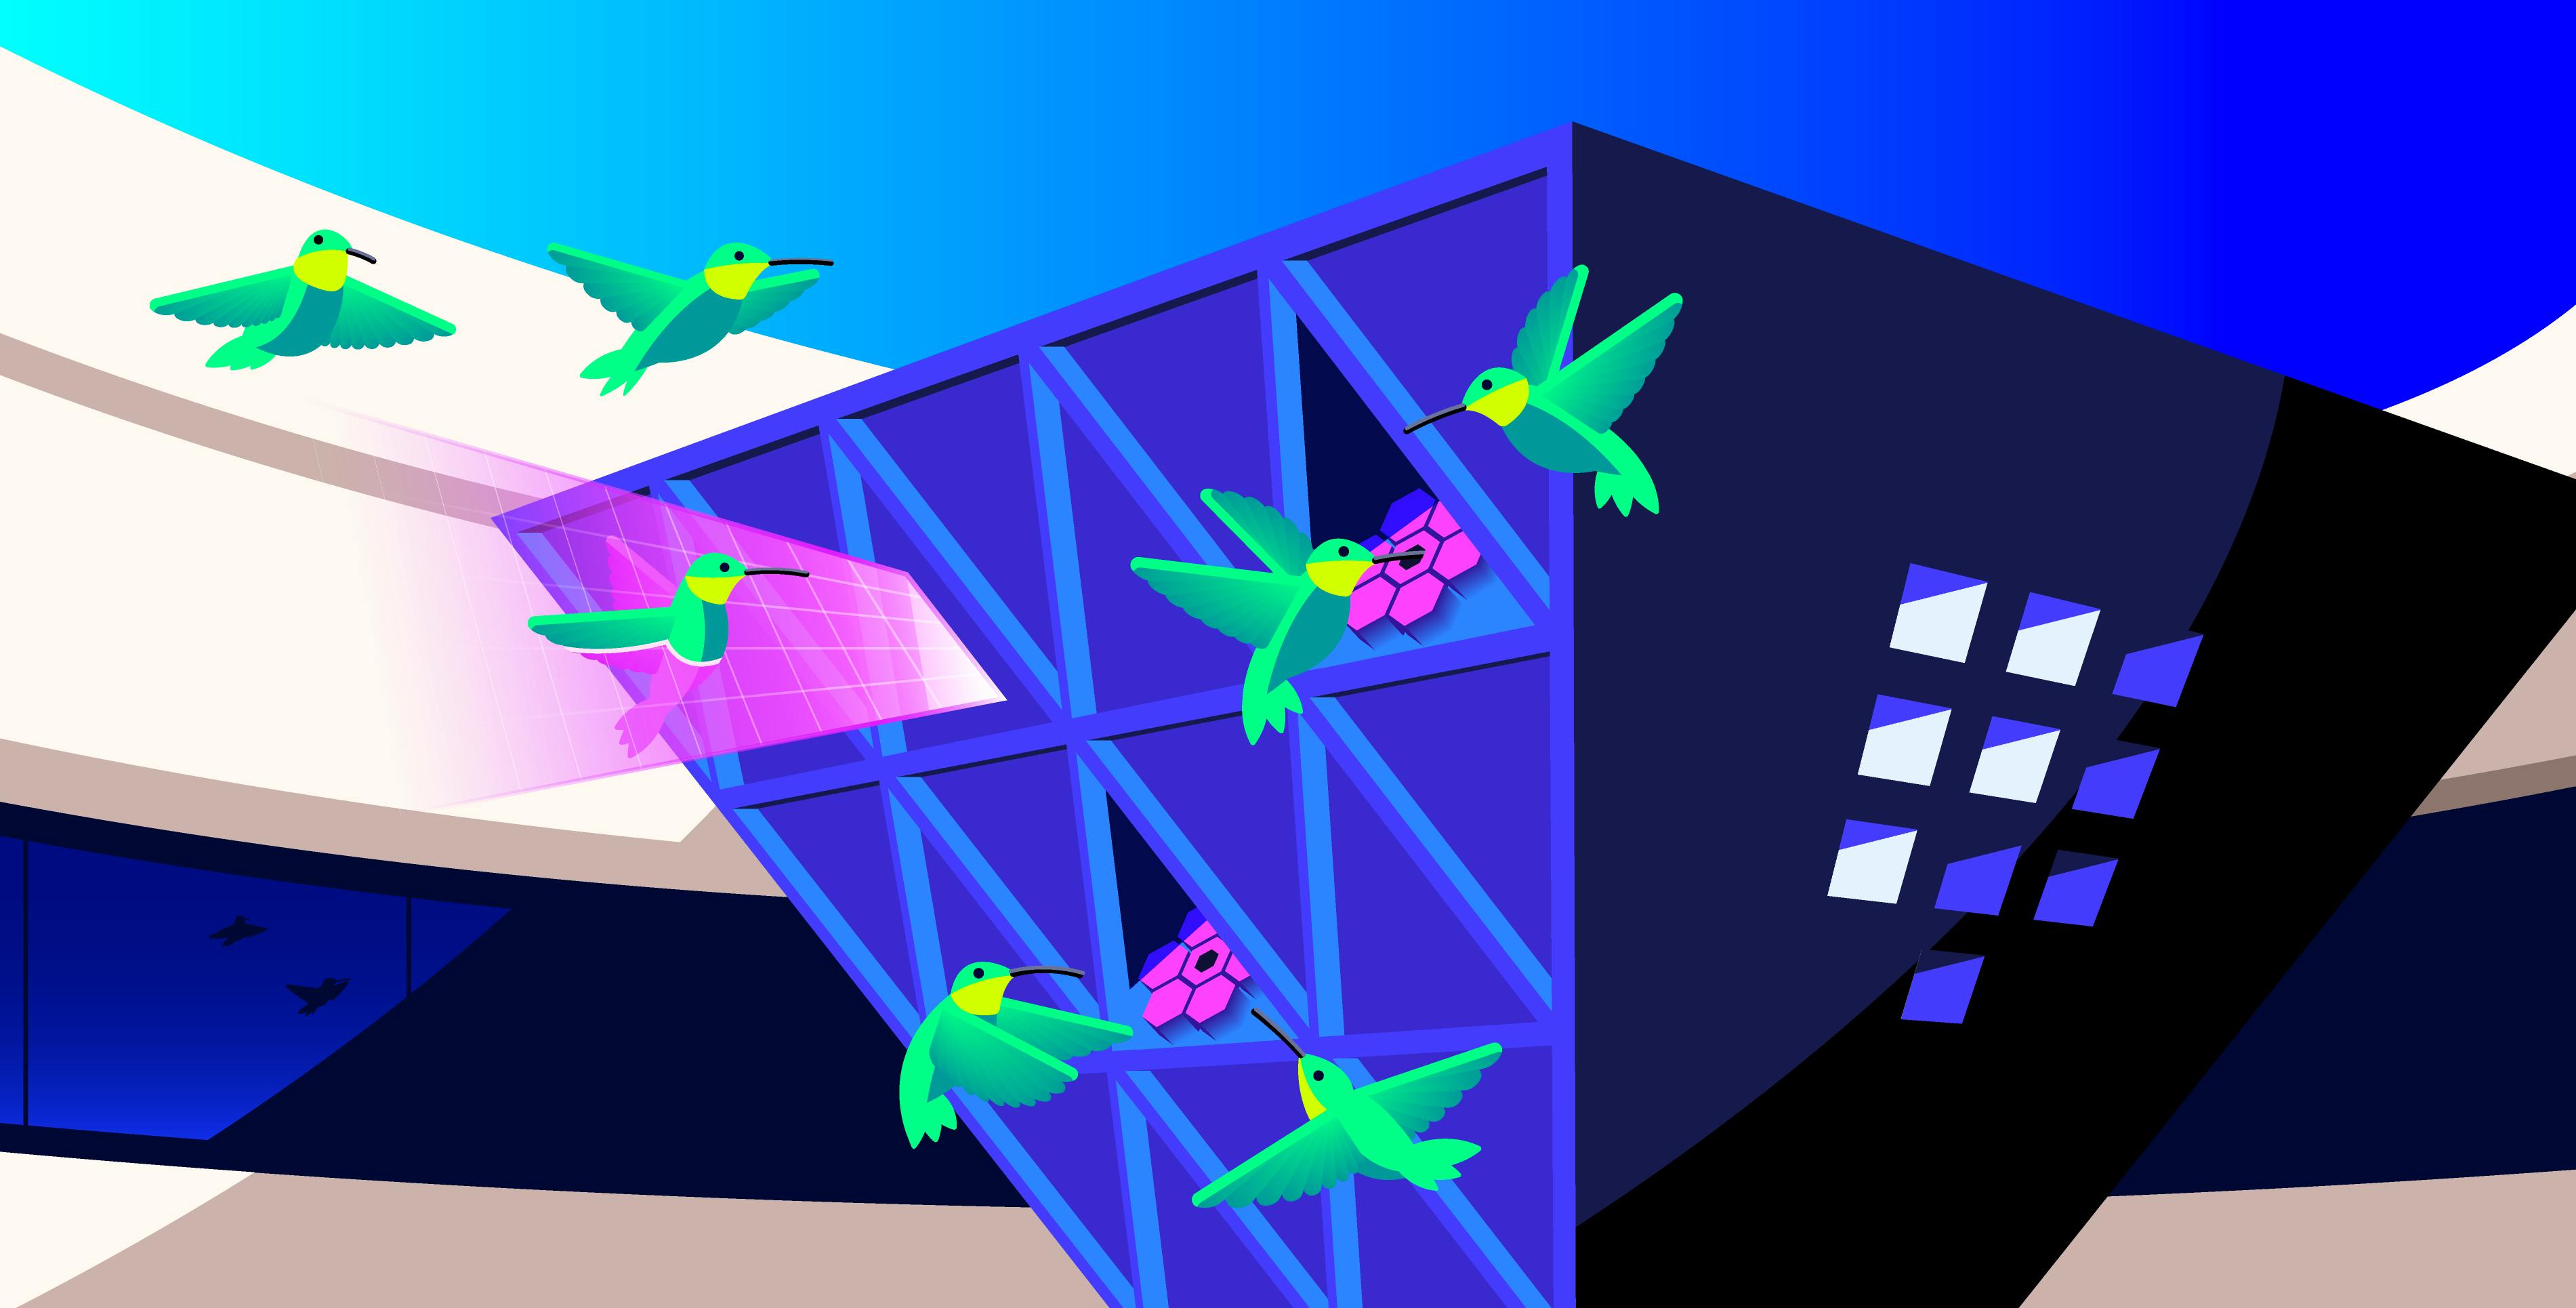 Digital and futuristic illustration portraying bright green hummingbirds feeding from a large, blue, square funnel with bright pink flowers.